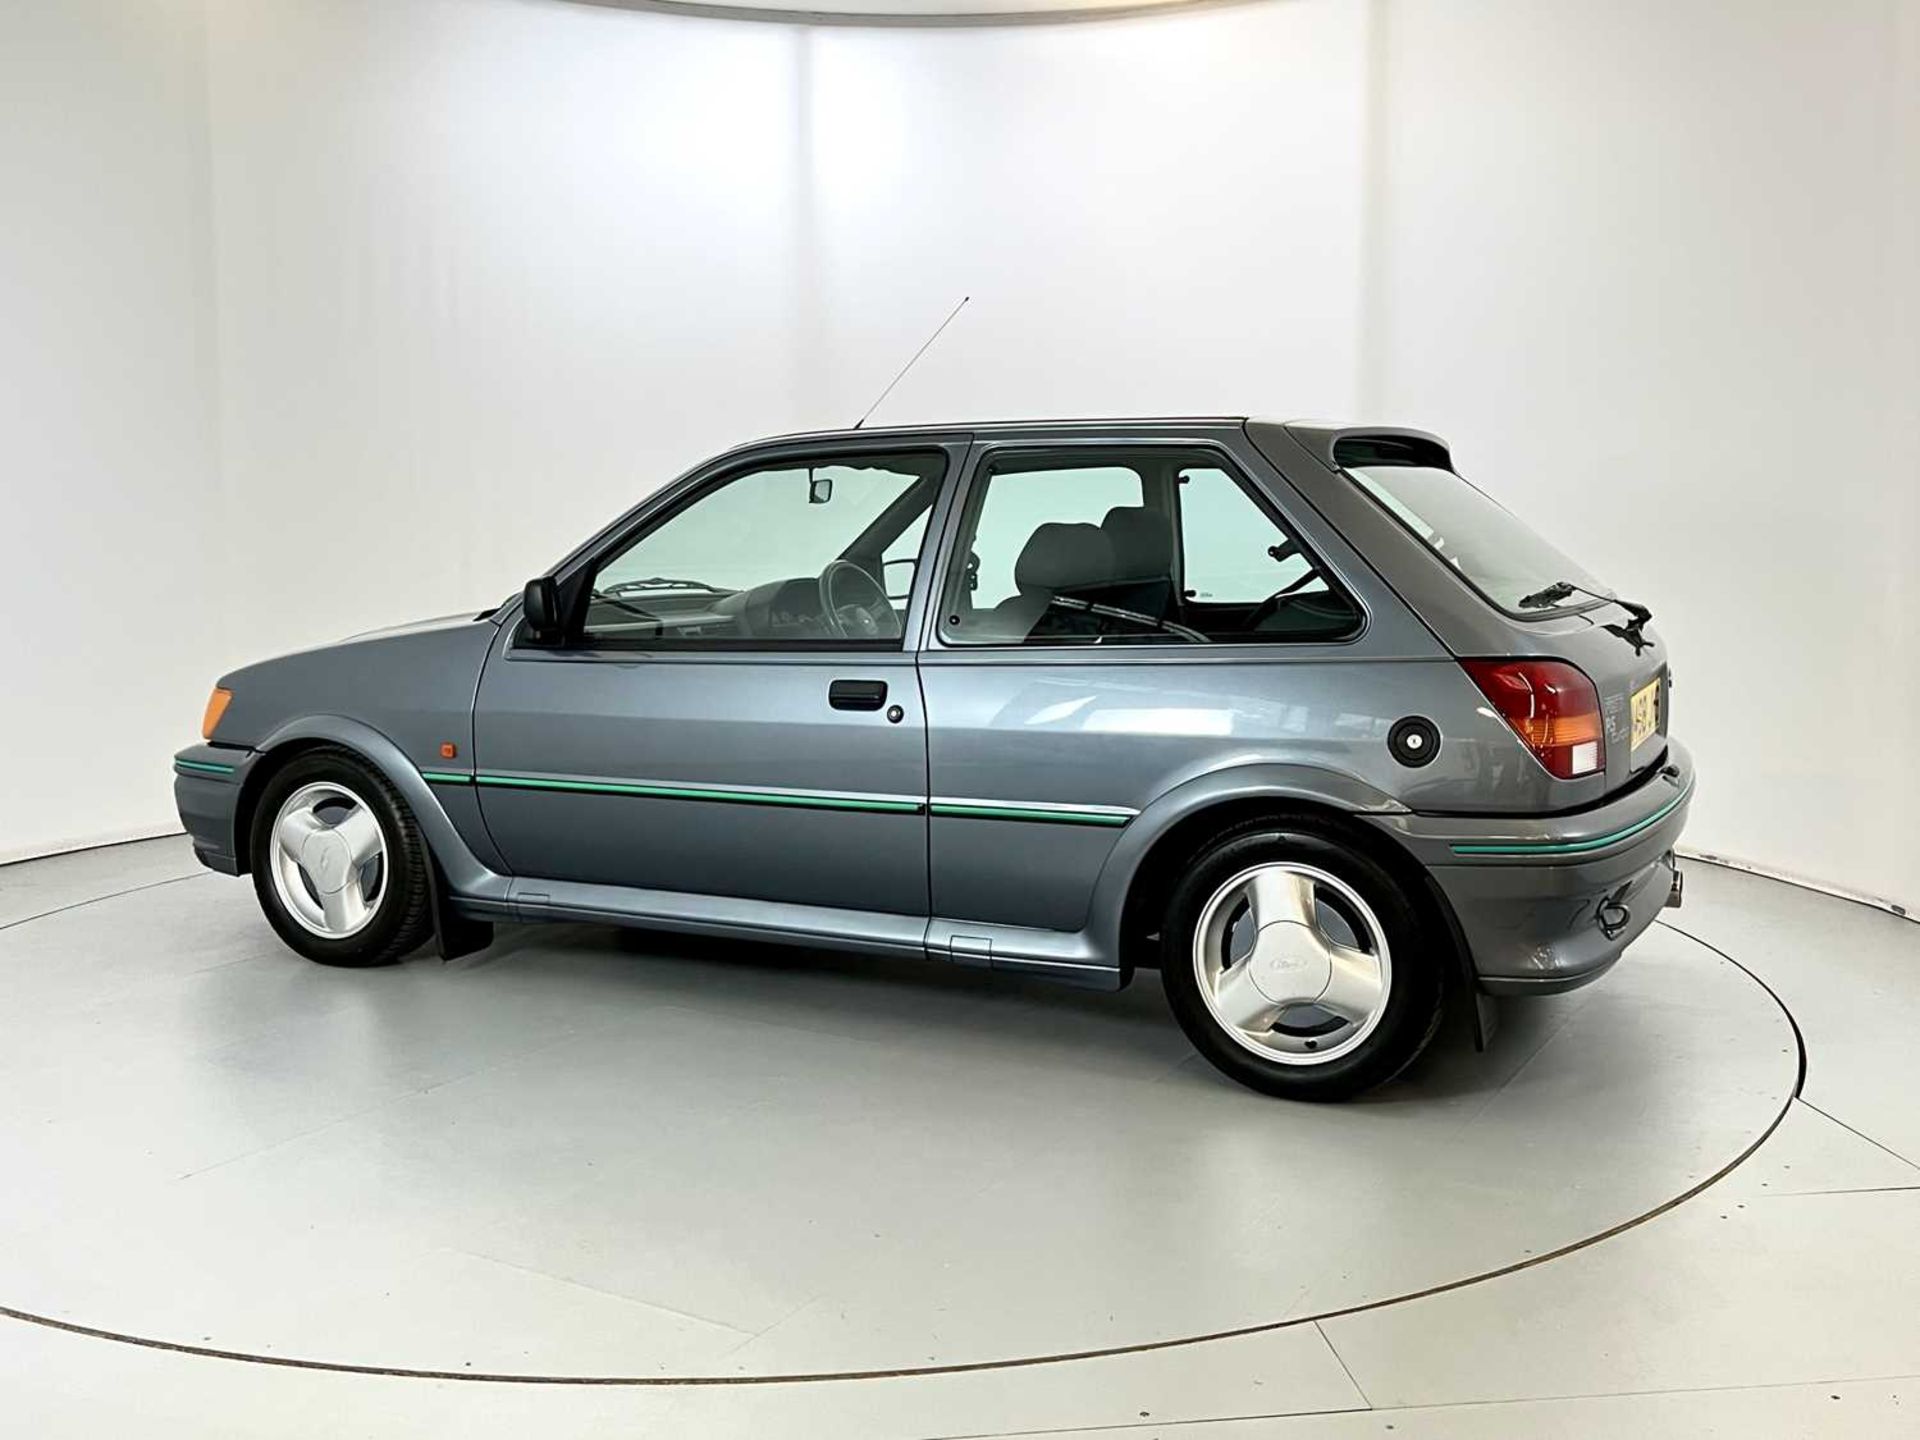 1991 Ford Fiesta RS Turbo - Image 6 of 32